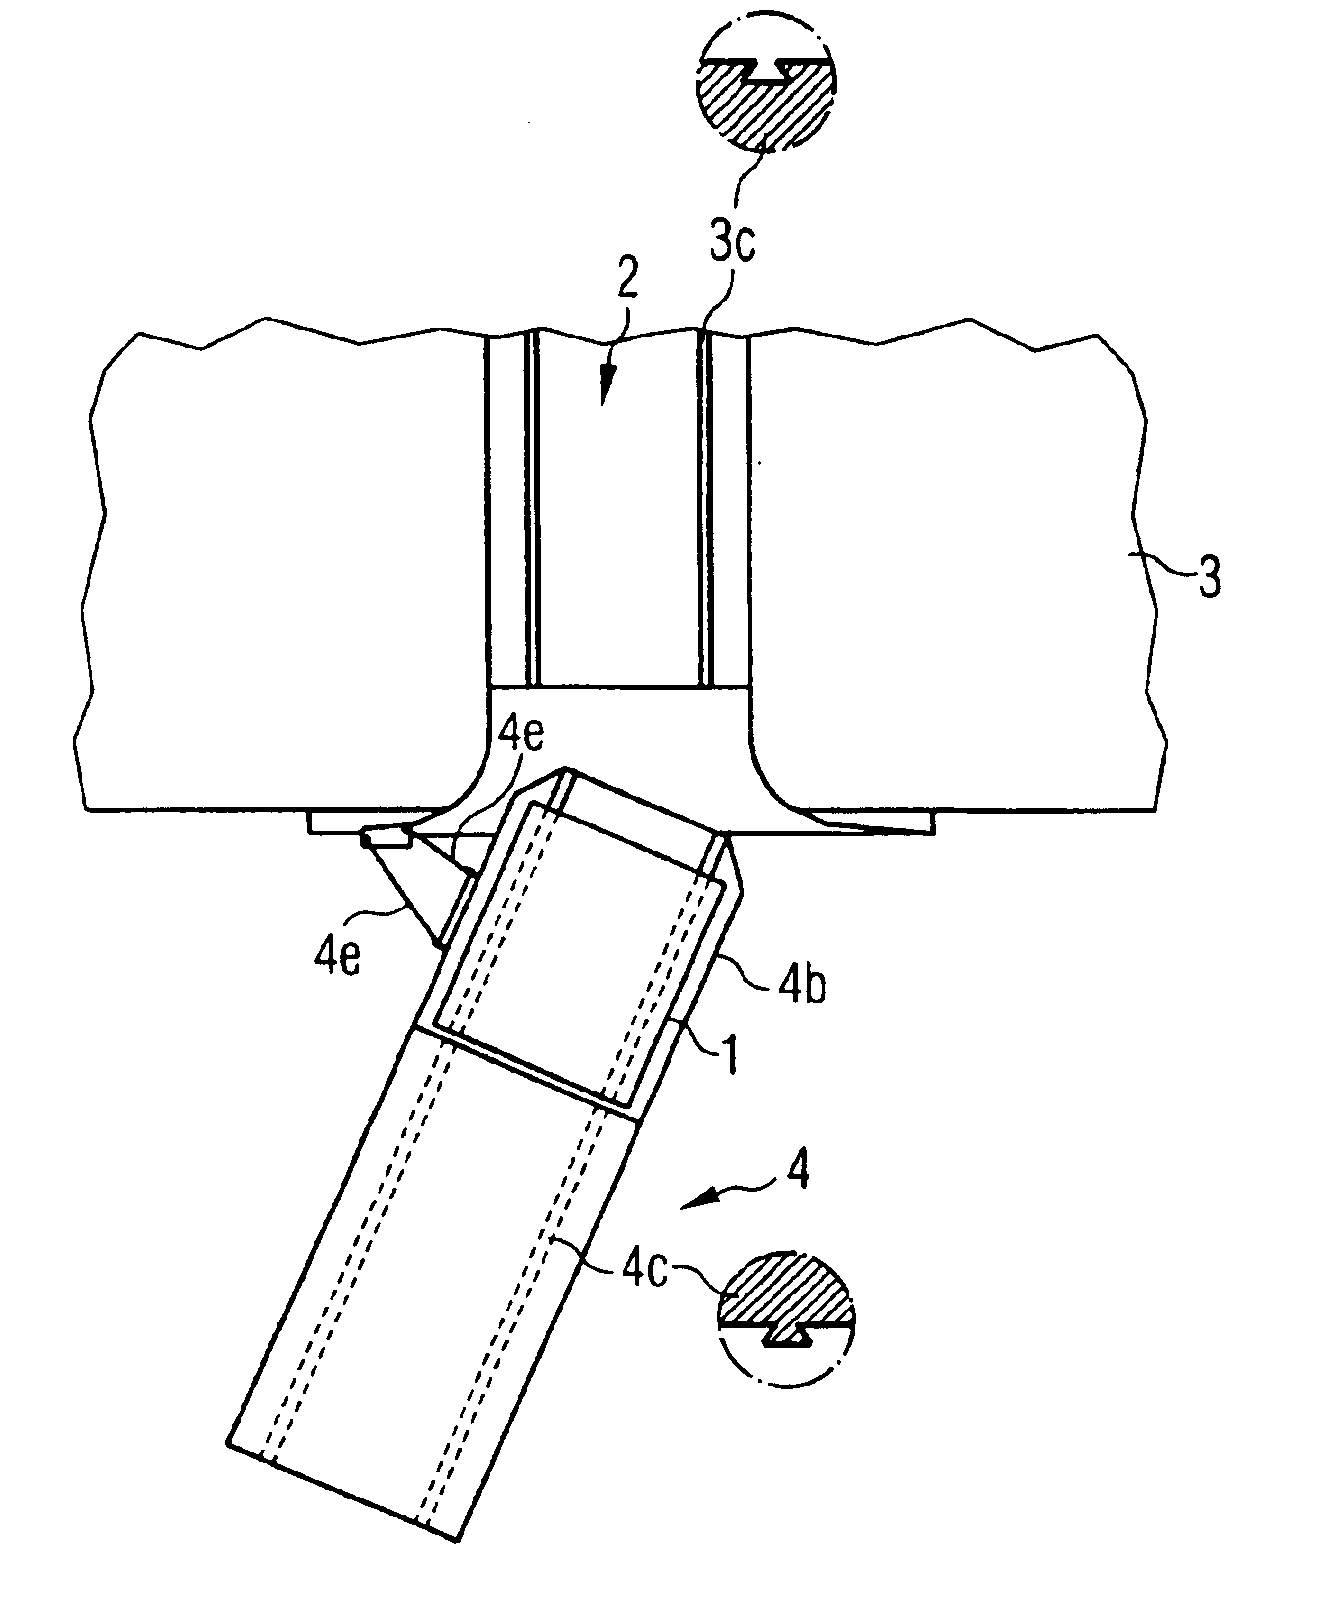 Insertion device for gradient coils of a magnetic resonance apparatus